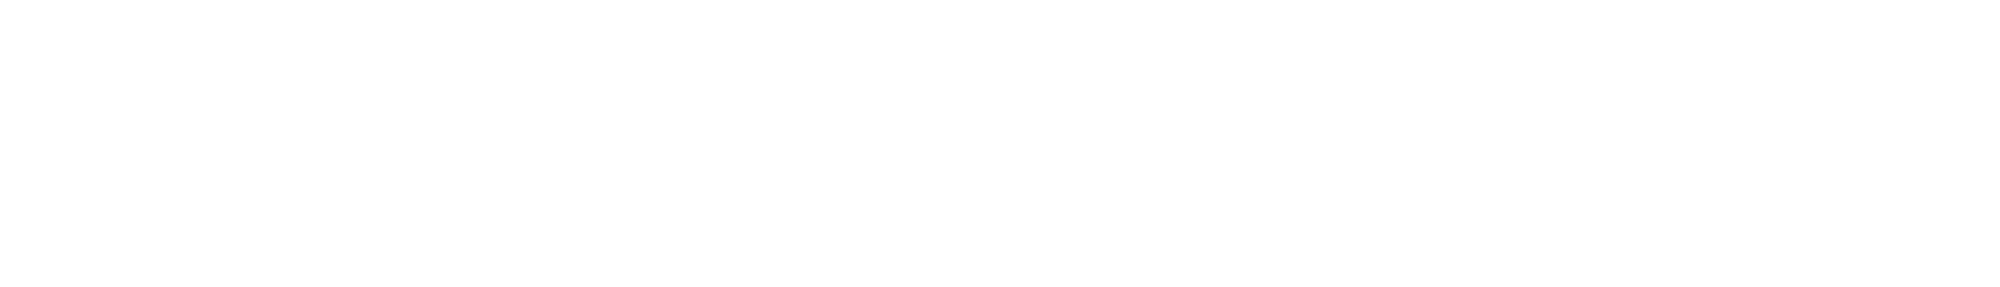 Picture of all APCA awards won by Tom Krieglstein